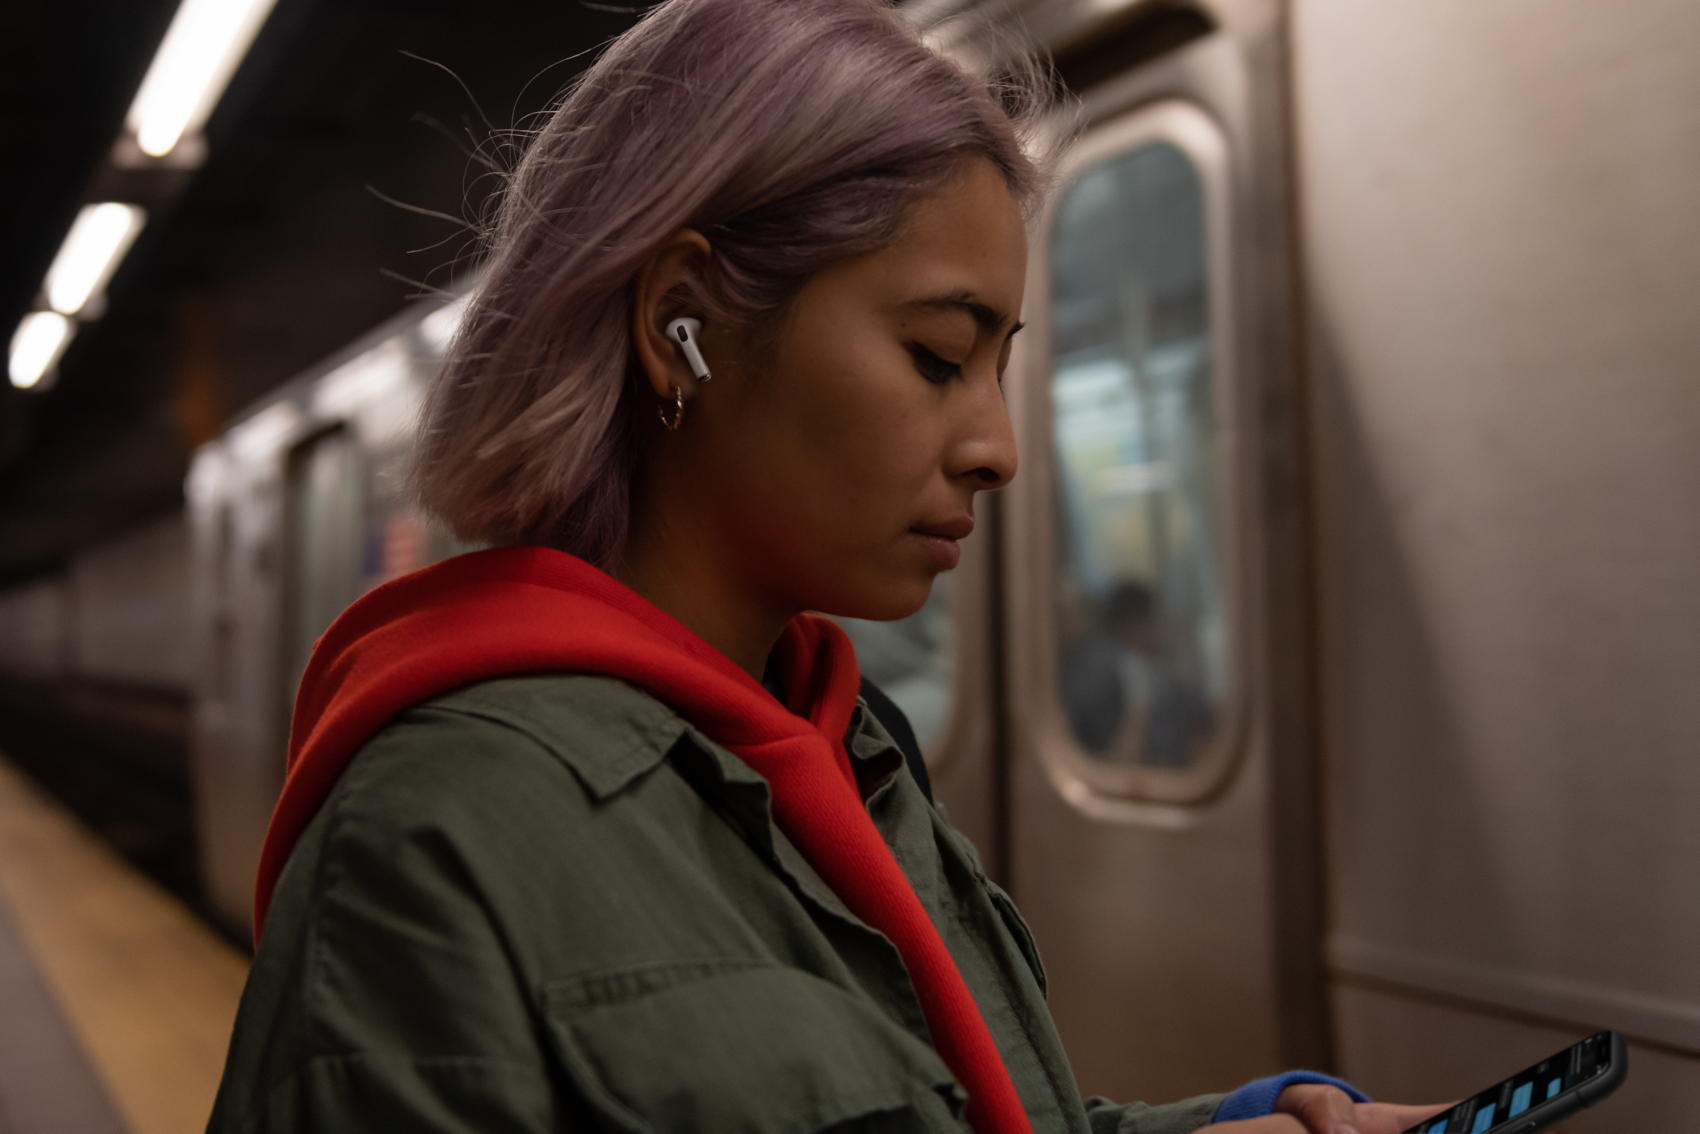 Apple AirPods Pro Lifestyle - Credit Apple